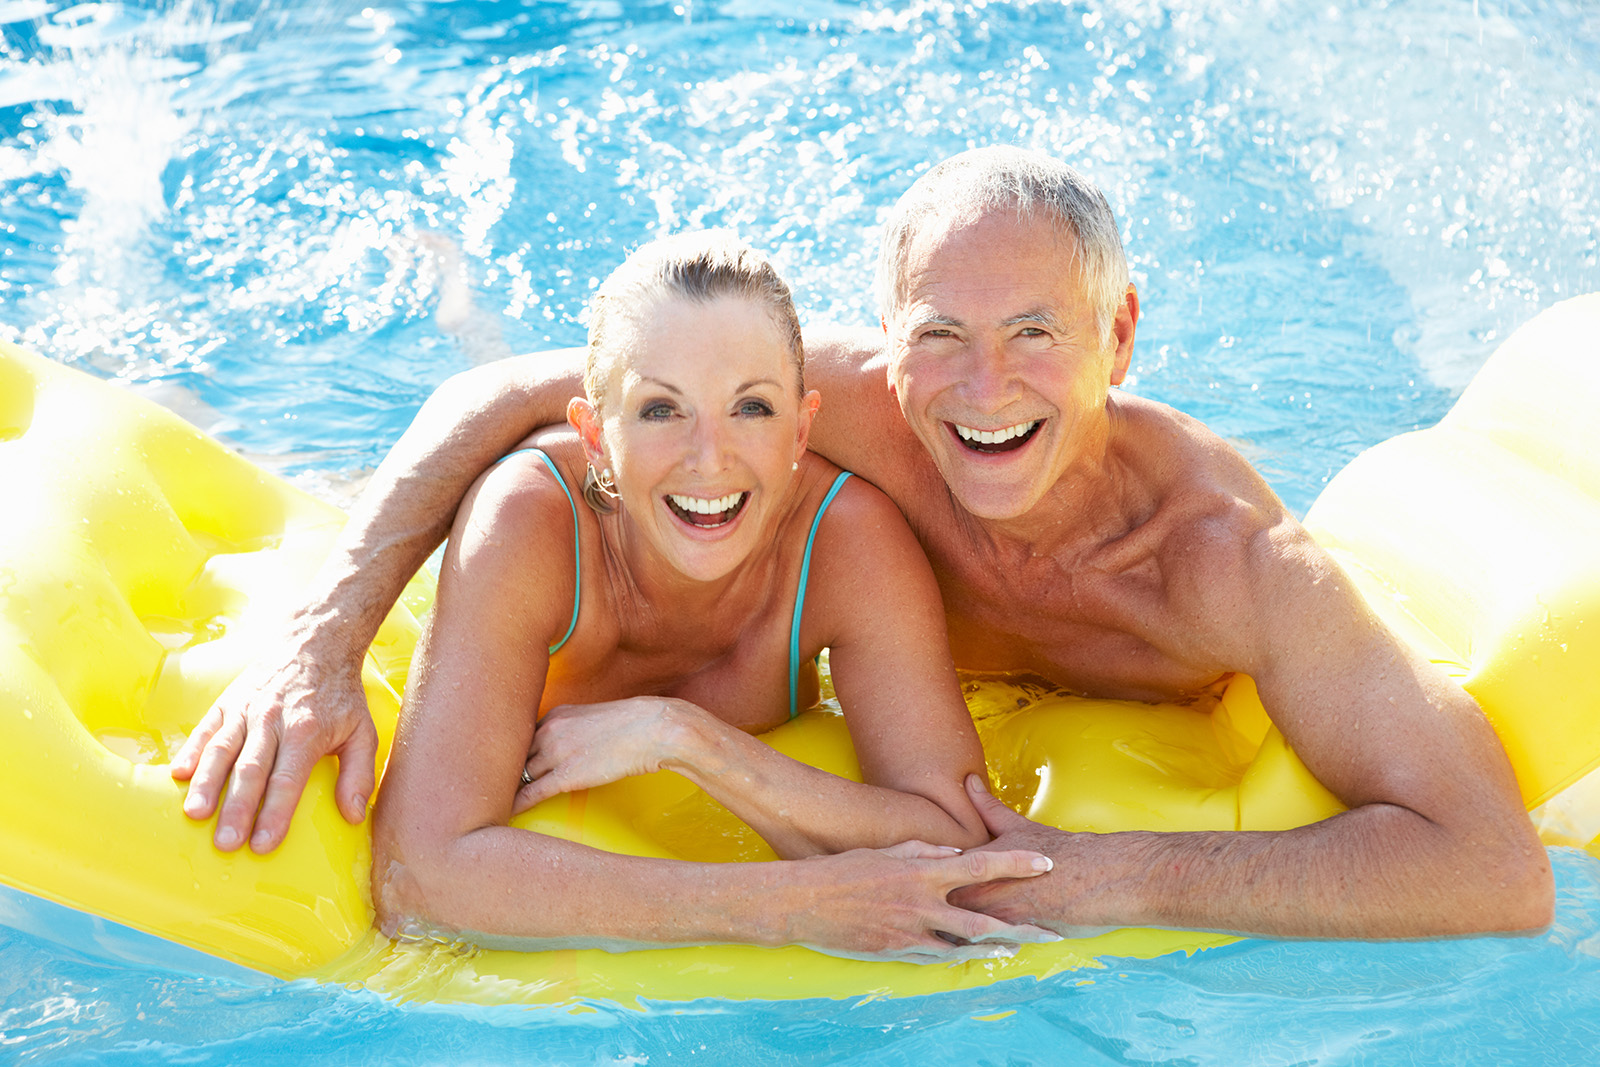 A mature, older couple enjoy their raft in the pool. The man and woman hold hands and smile.